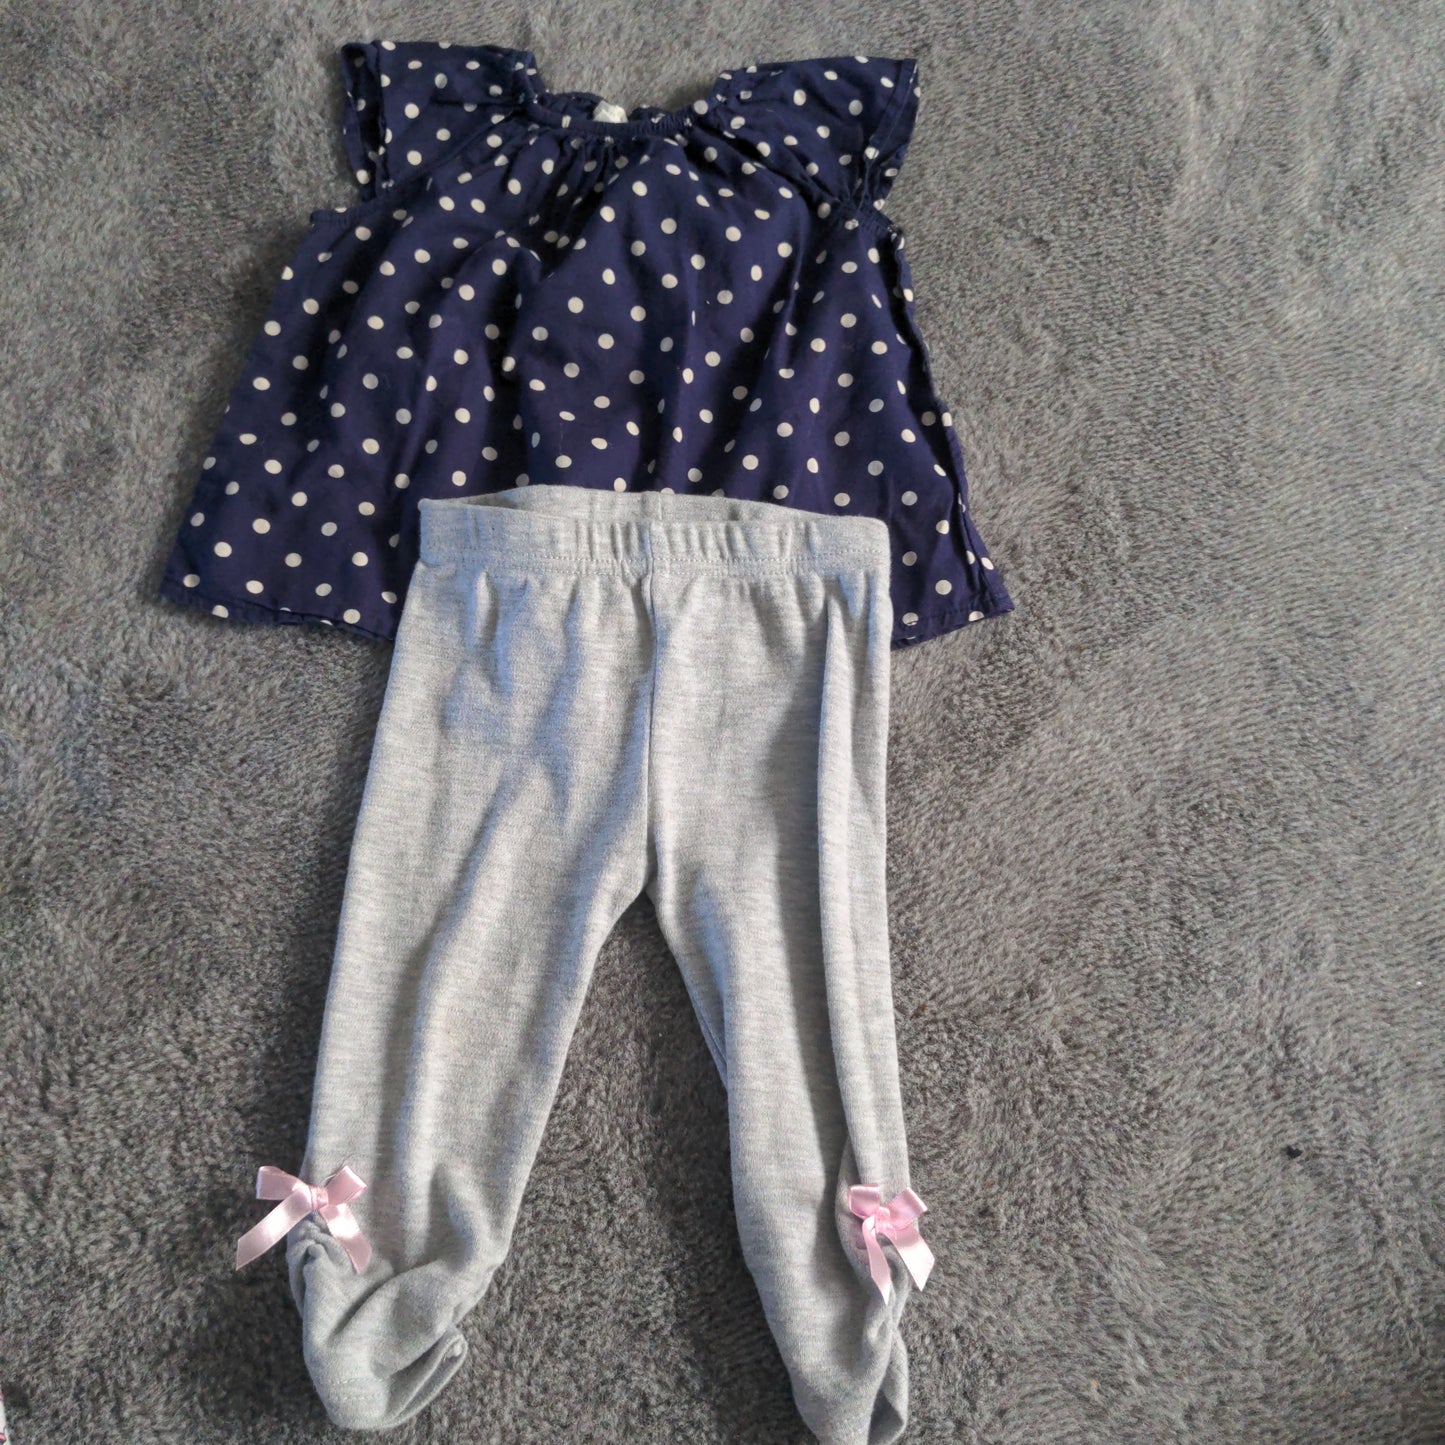 Navy/ grey outfit size 6-9 mo